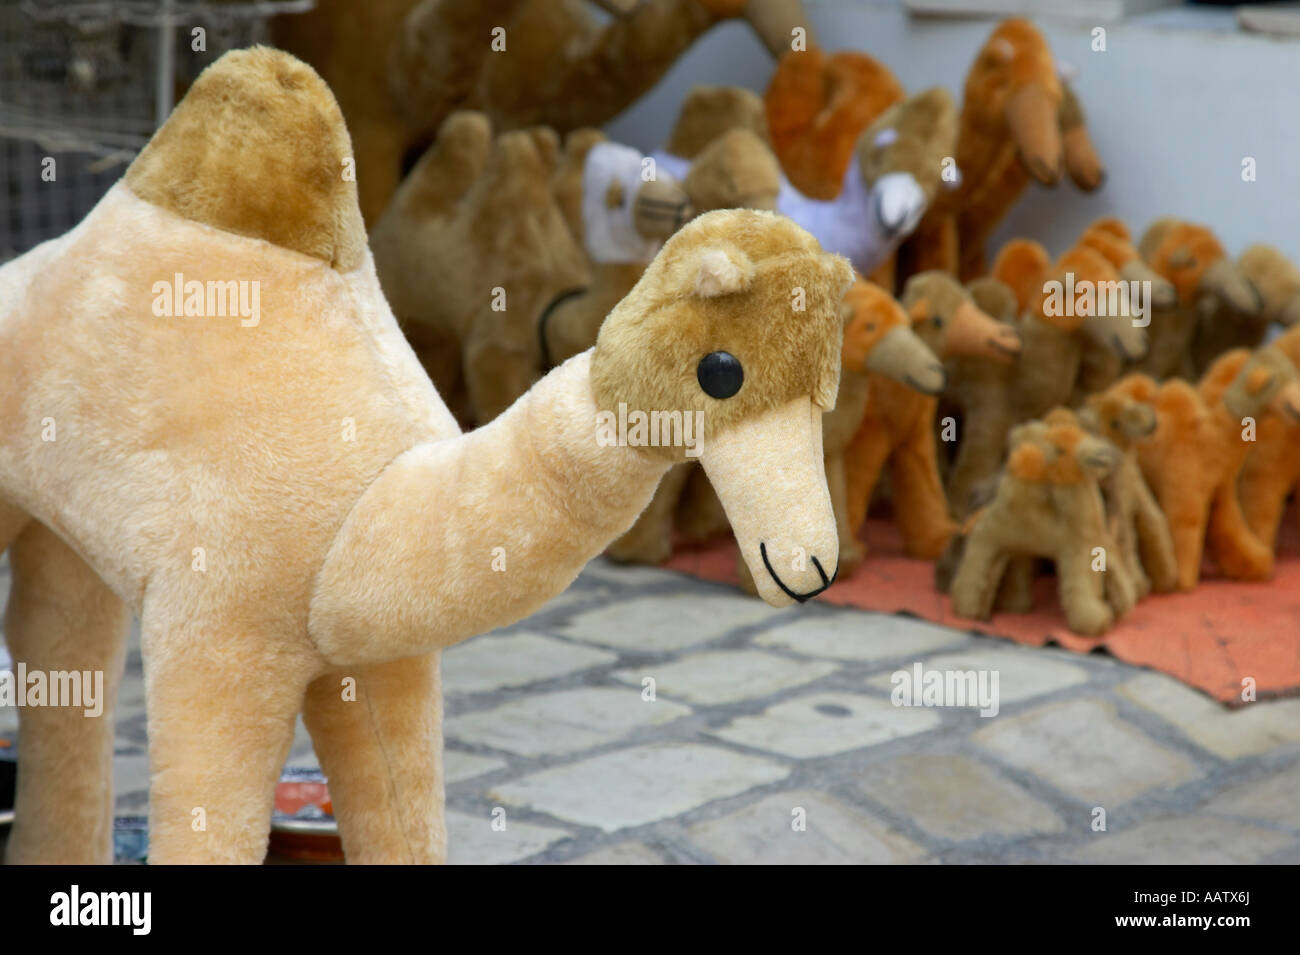 large soft toy stuffed camel souvenir at market stall in nabeul tunisia Stock Photo